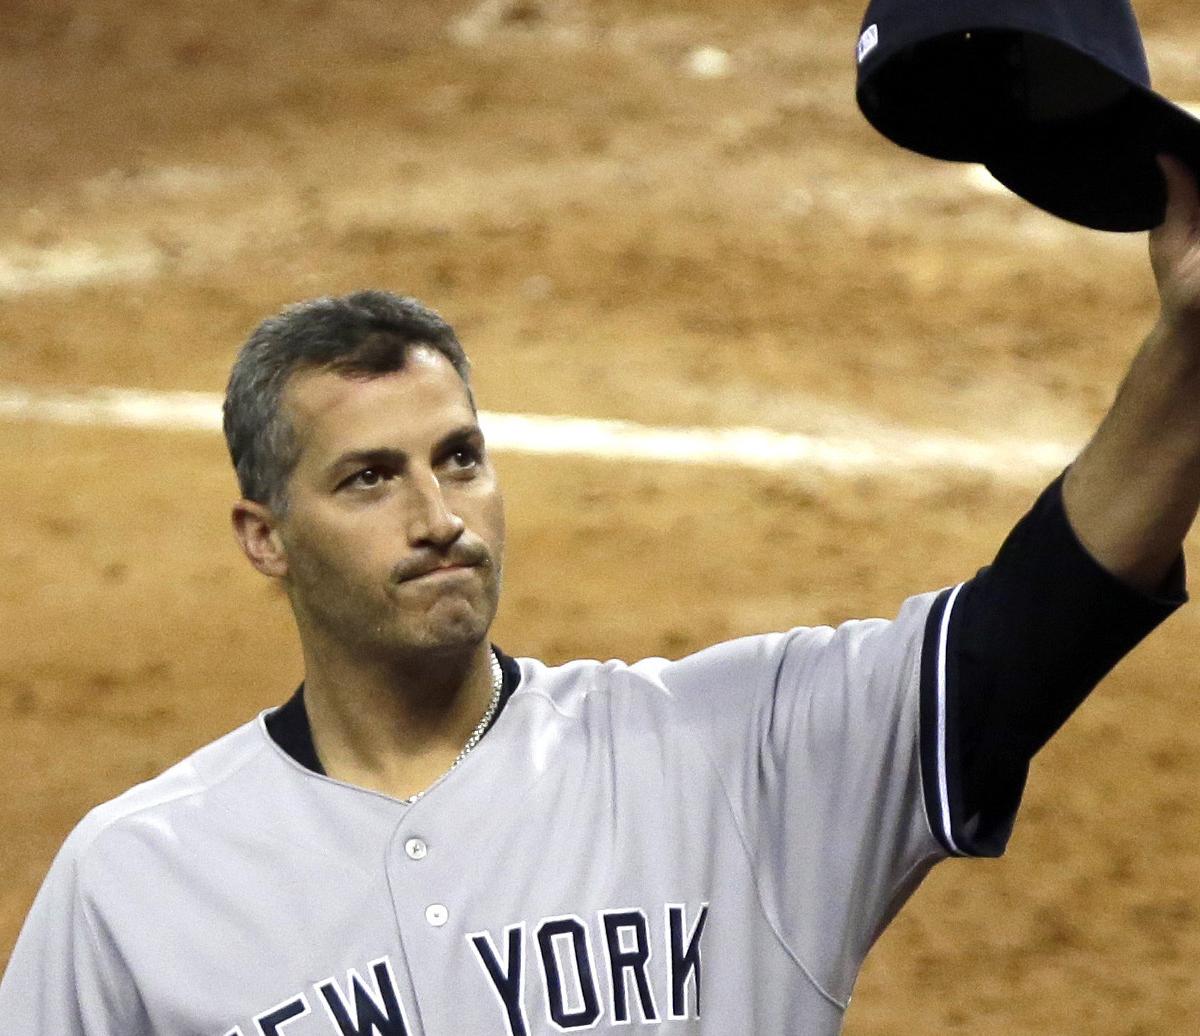 900+ ANDY PETTITTE #46 ideas  andy pettitte, andy, new york yankees